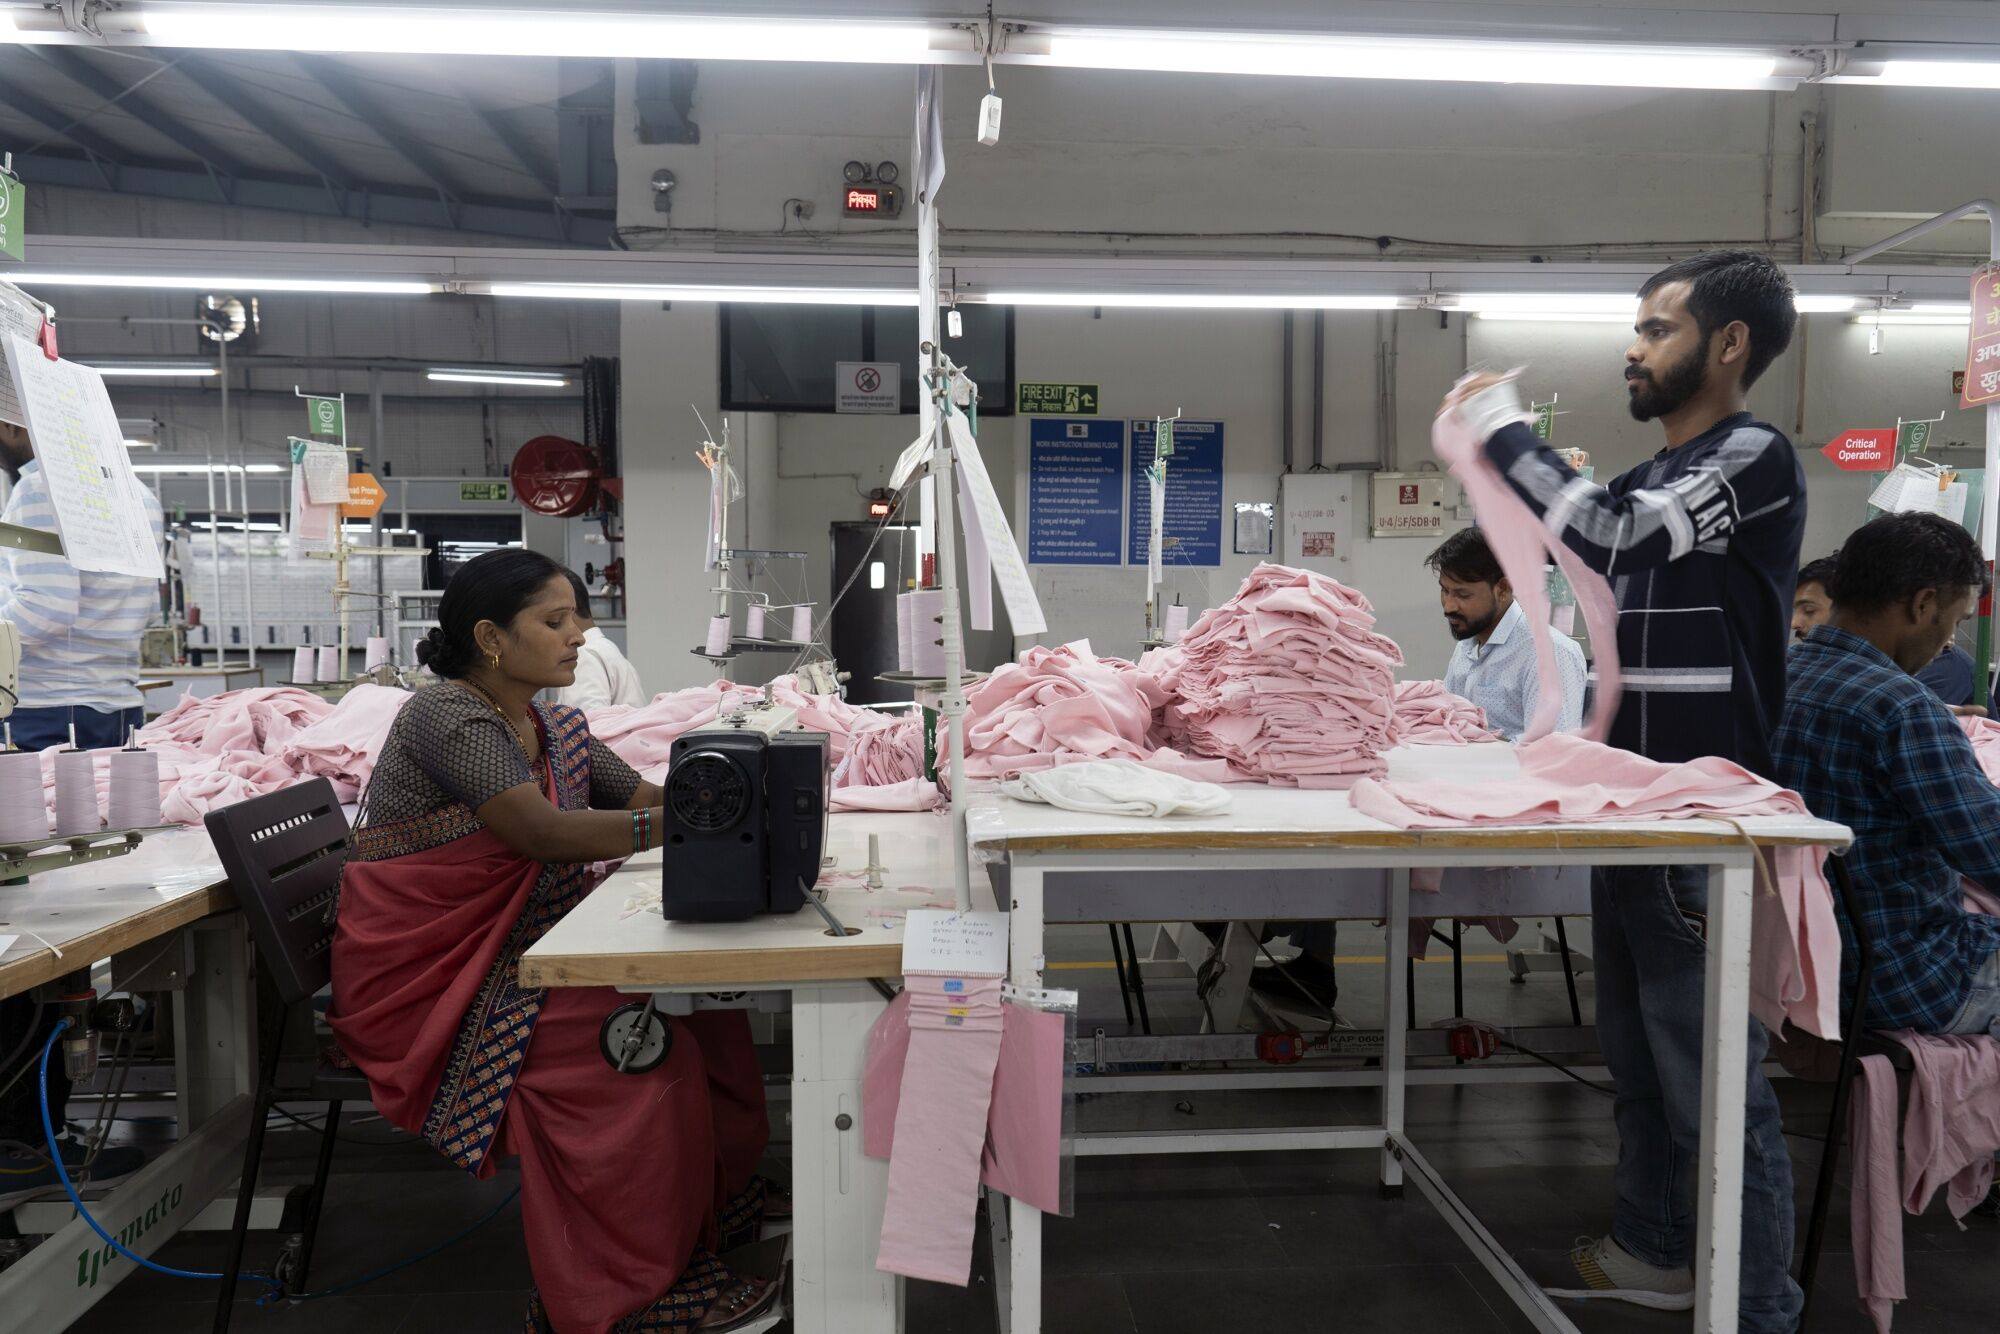 Workers make clothing for Ralph Lauren Corp. at a factory in Gurugram earlier this month. Observers say some of India’s neighbours have better positioned themselves for garment production. Photo: Bloomberg